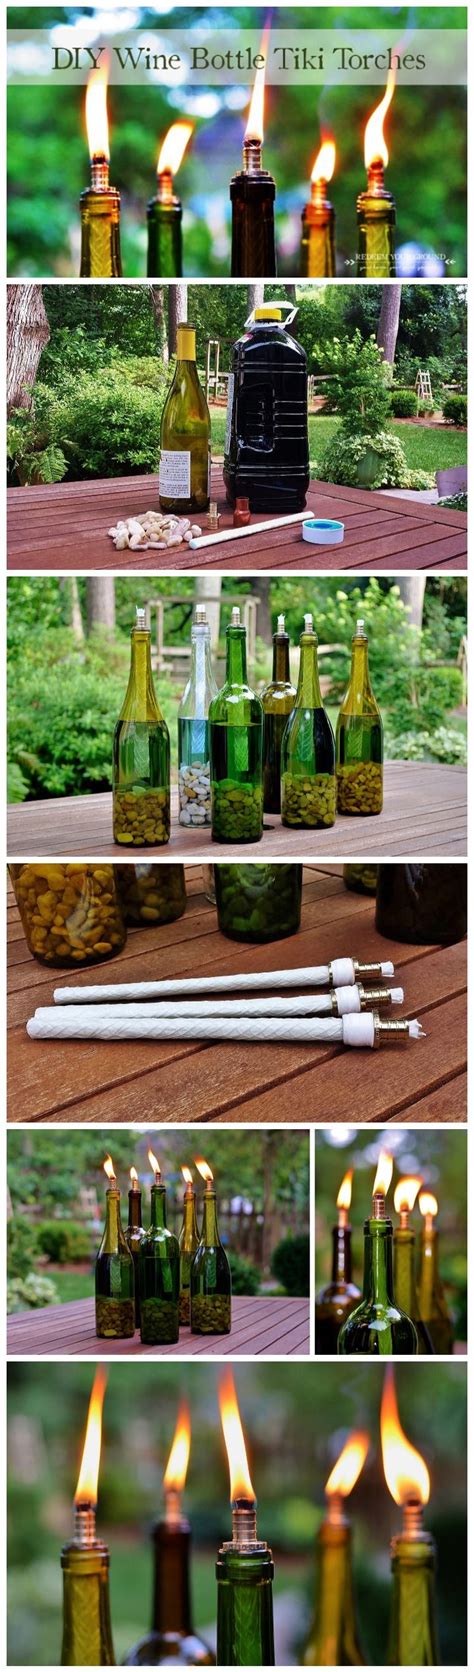 Diy Wine Bottle Tiki Torch Pictures Photos And Images For Facebook